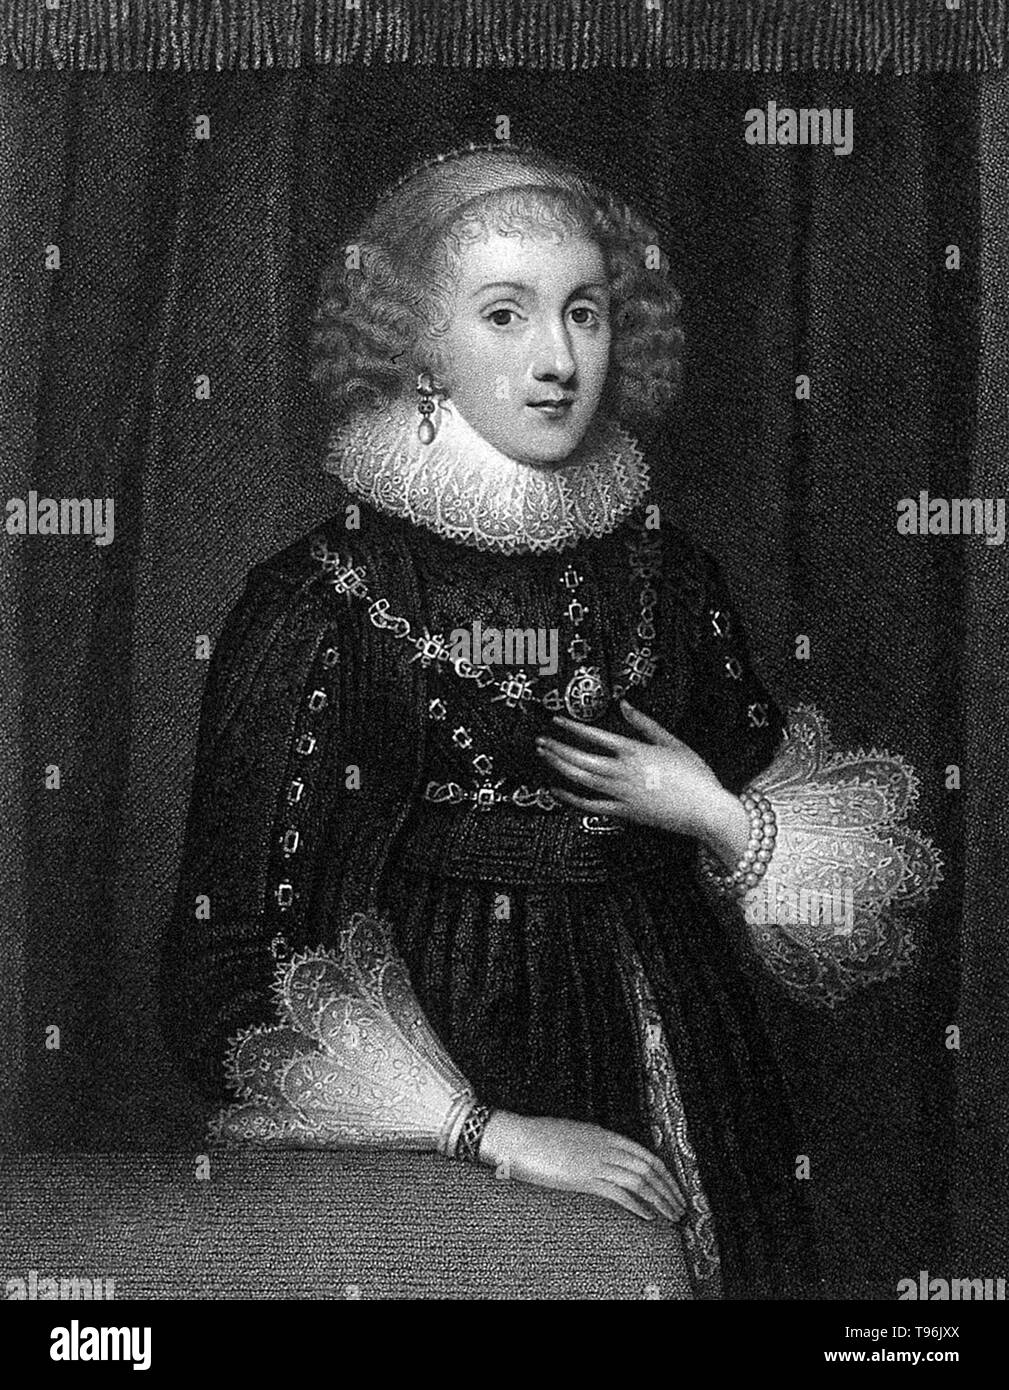 Mary Herbert, Countess of Pembroke (October 27, 1561 - September 25, 1621) was one of the first English women to achieve a major reputation for her poetry and literary patronage. By the age of 39, she was listed with her brother Philip Sidney, Edmund Spenser, and William Shakespeare, as one of the notable authors of her time. Stock Photo